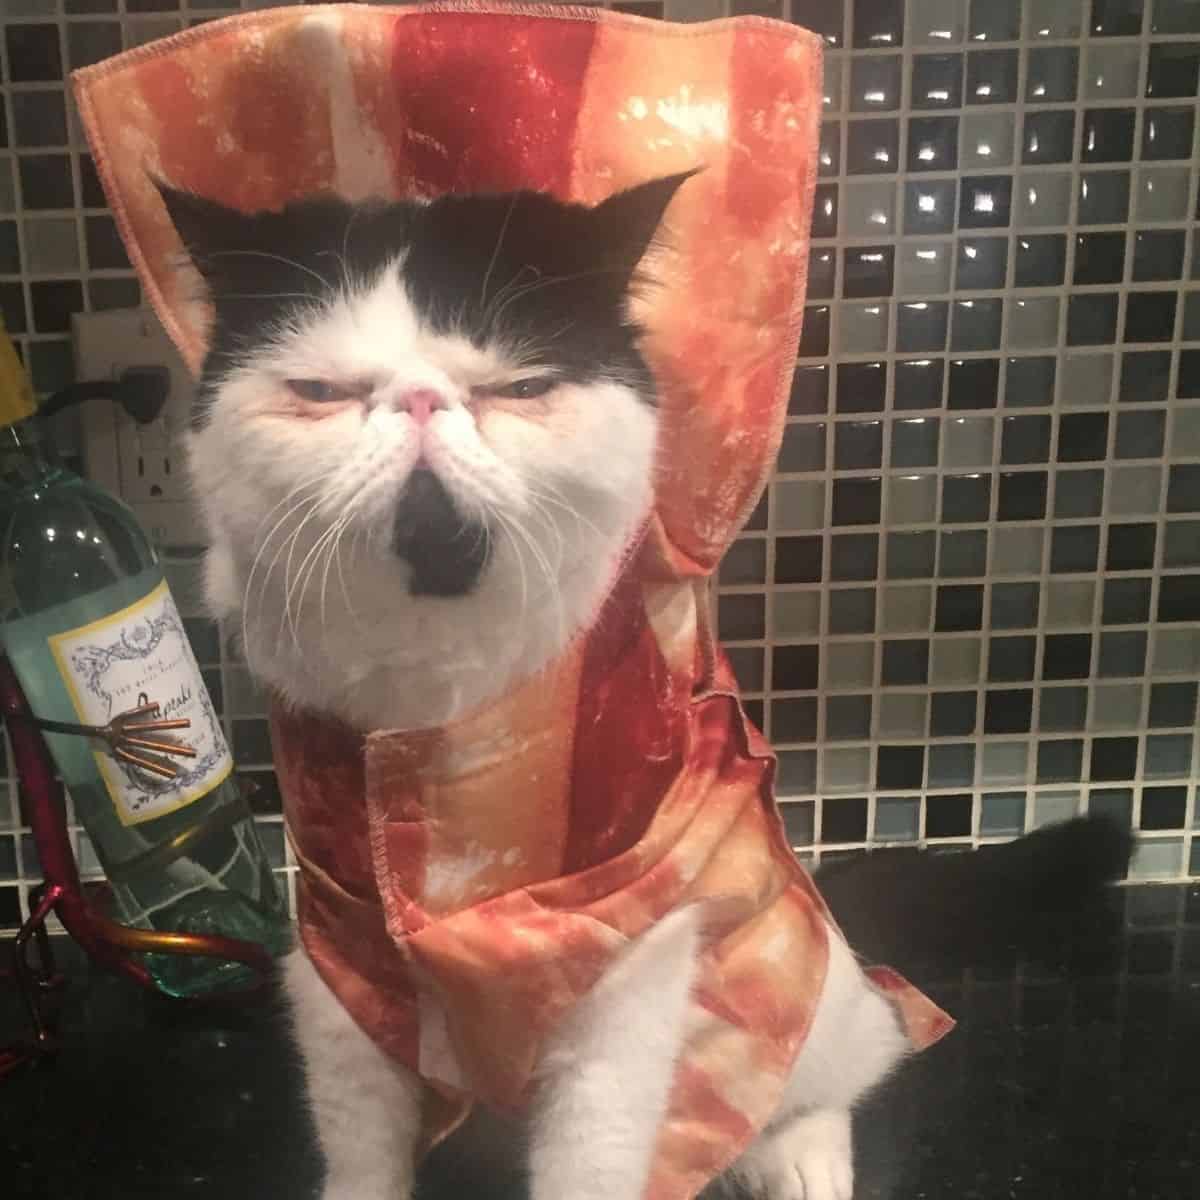 Bacon Cat sits scowling on the kitchen counter